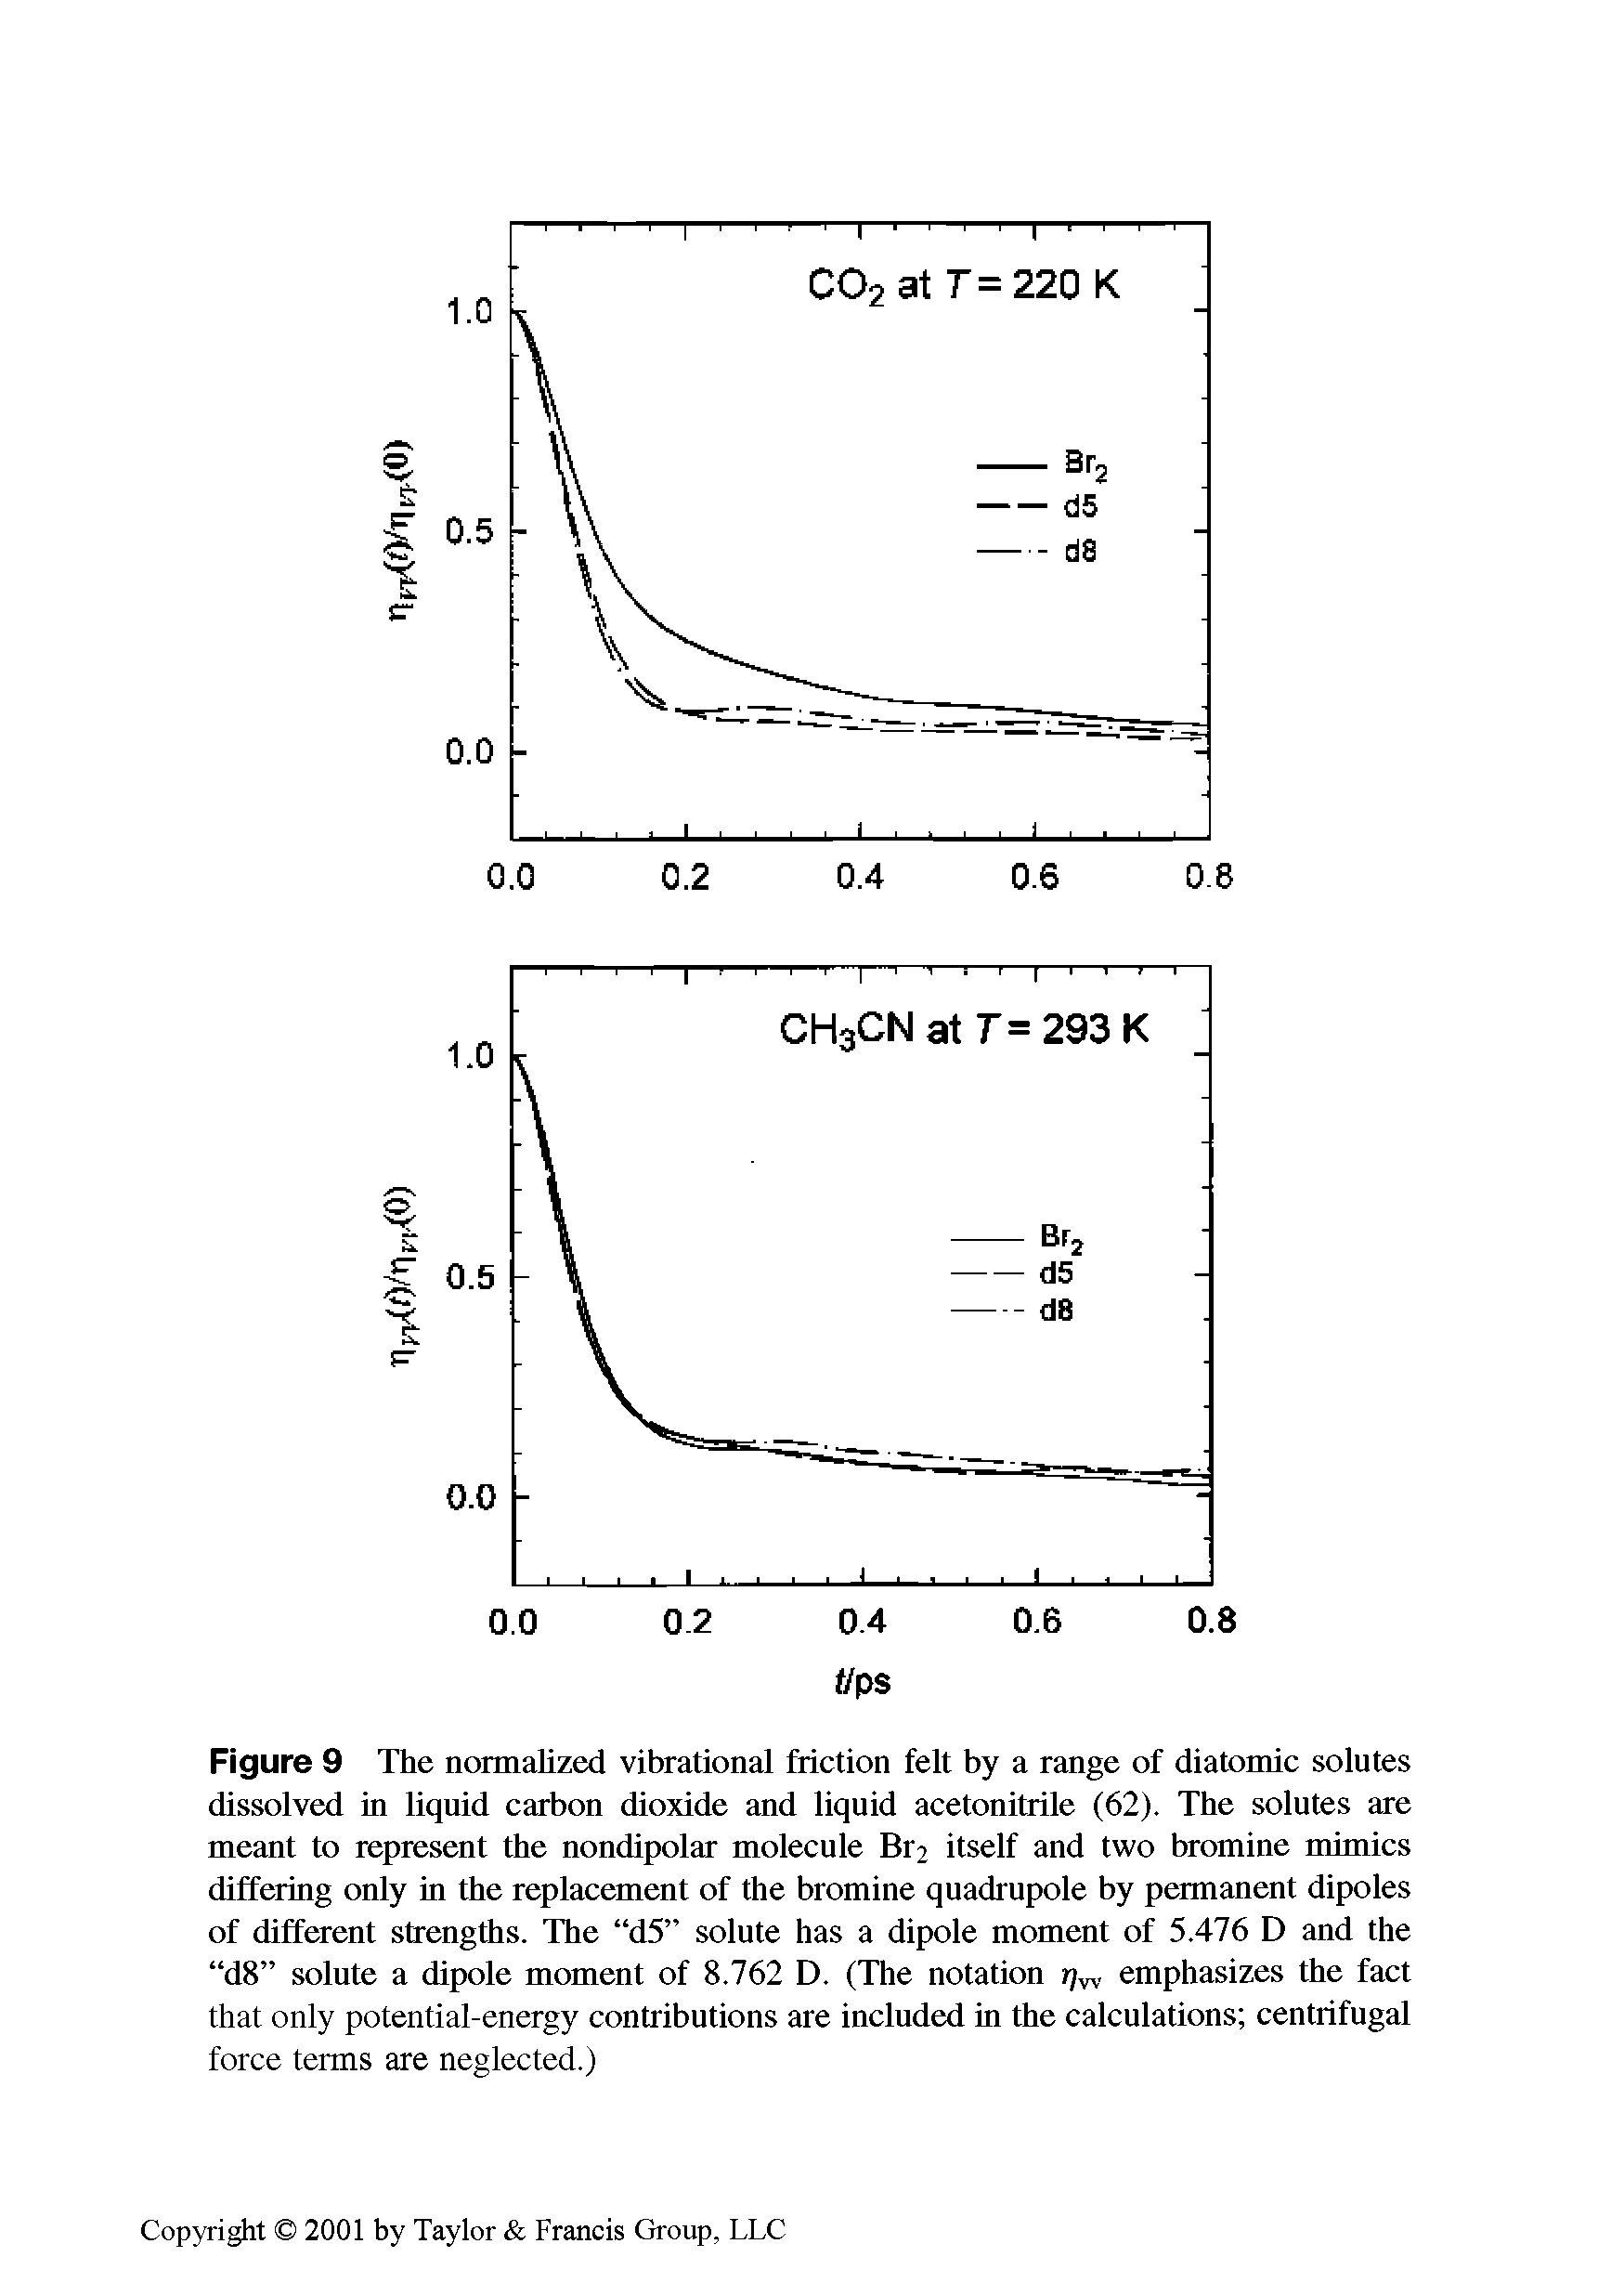 Figure 9 The normalized vibrational friction felt by a range of diatomic solutes dissolved in liquid carbon dioxide and liquid acetonitrile (62). The solutes are meant to represent the nondipolar molecule Br2 itself and two bromine mimics differing only in the replacement of the bromine quadrupole by permanent dipoles of different strengths. The d5 solute has a dipole moment of 5.476 D and the d8 solute a dipole moment of 8.762 D. (The notation r/vv emphasizes the fact that only potential-energy contributions are included in the calculations centrifugal force terms are neglected.)...